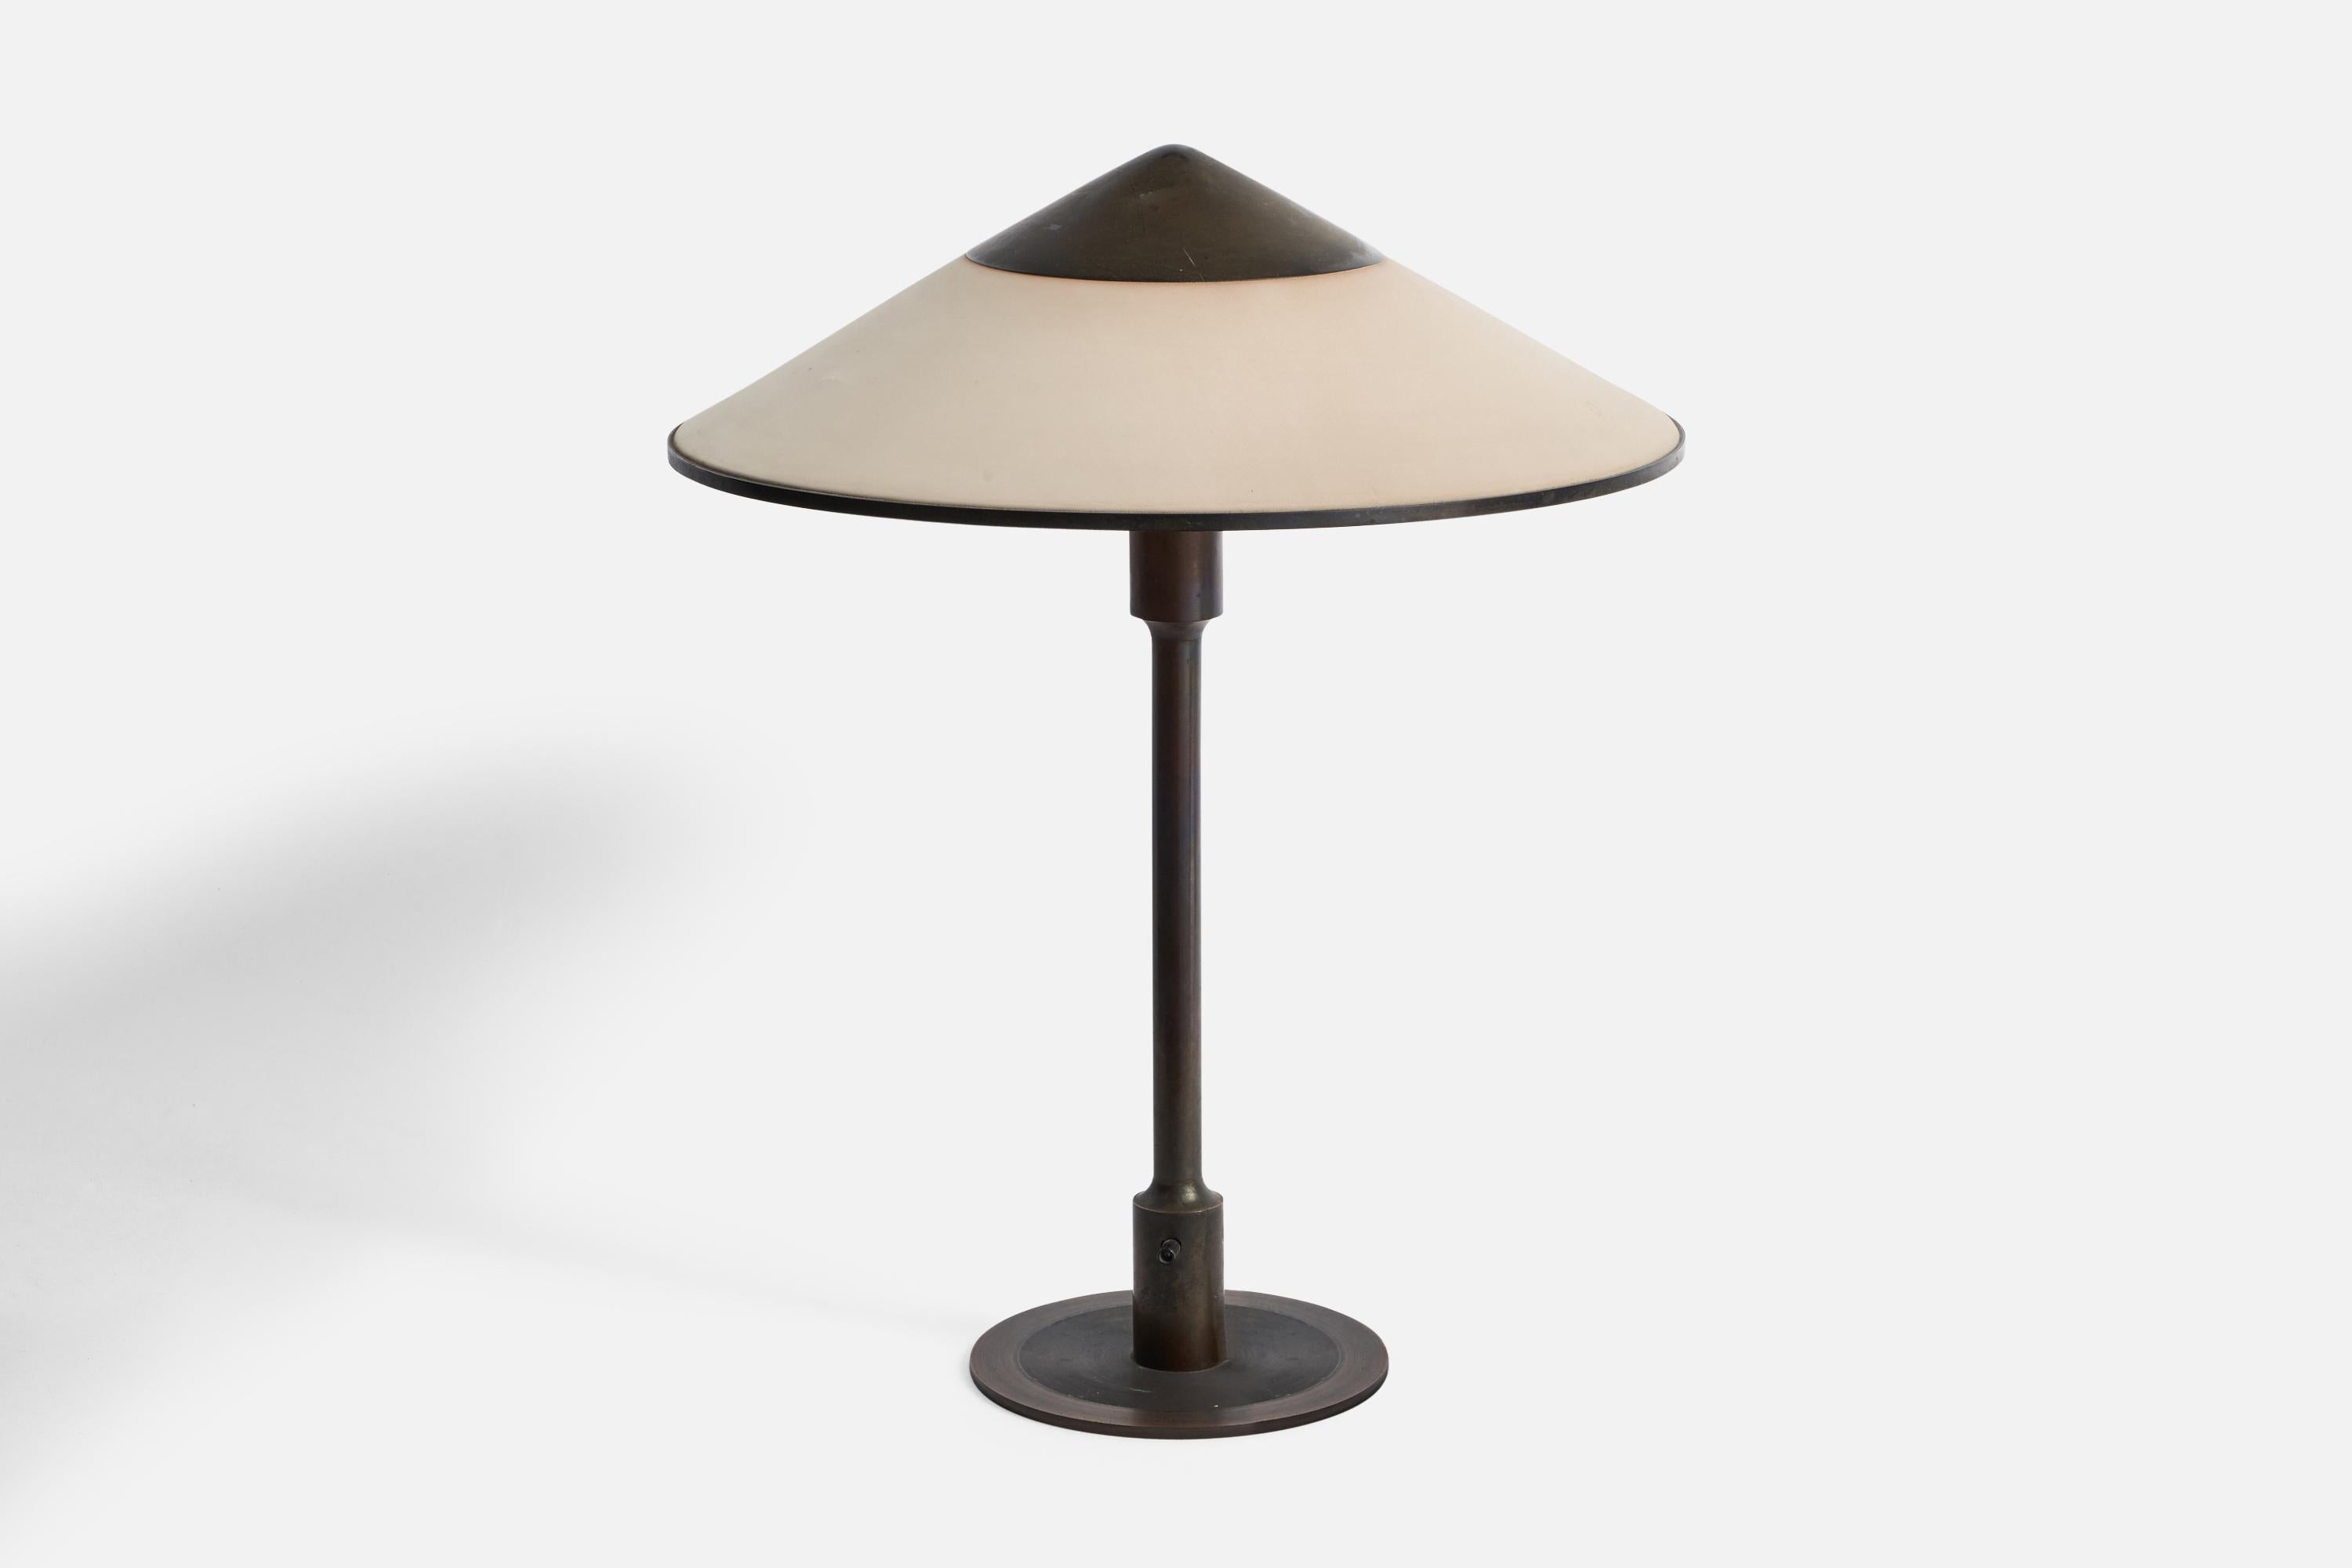 A brass and off-white waxed paper table lamp designed and produced by Niels Rasmussen Thykier, Denmark, 1930s.

Overall Dimensions (inches): 19.38” H x 15” Diameter
Bulb Specifications: E-26 Bulb
Number of Sockets: 1
All lighting will be converted